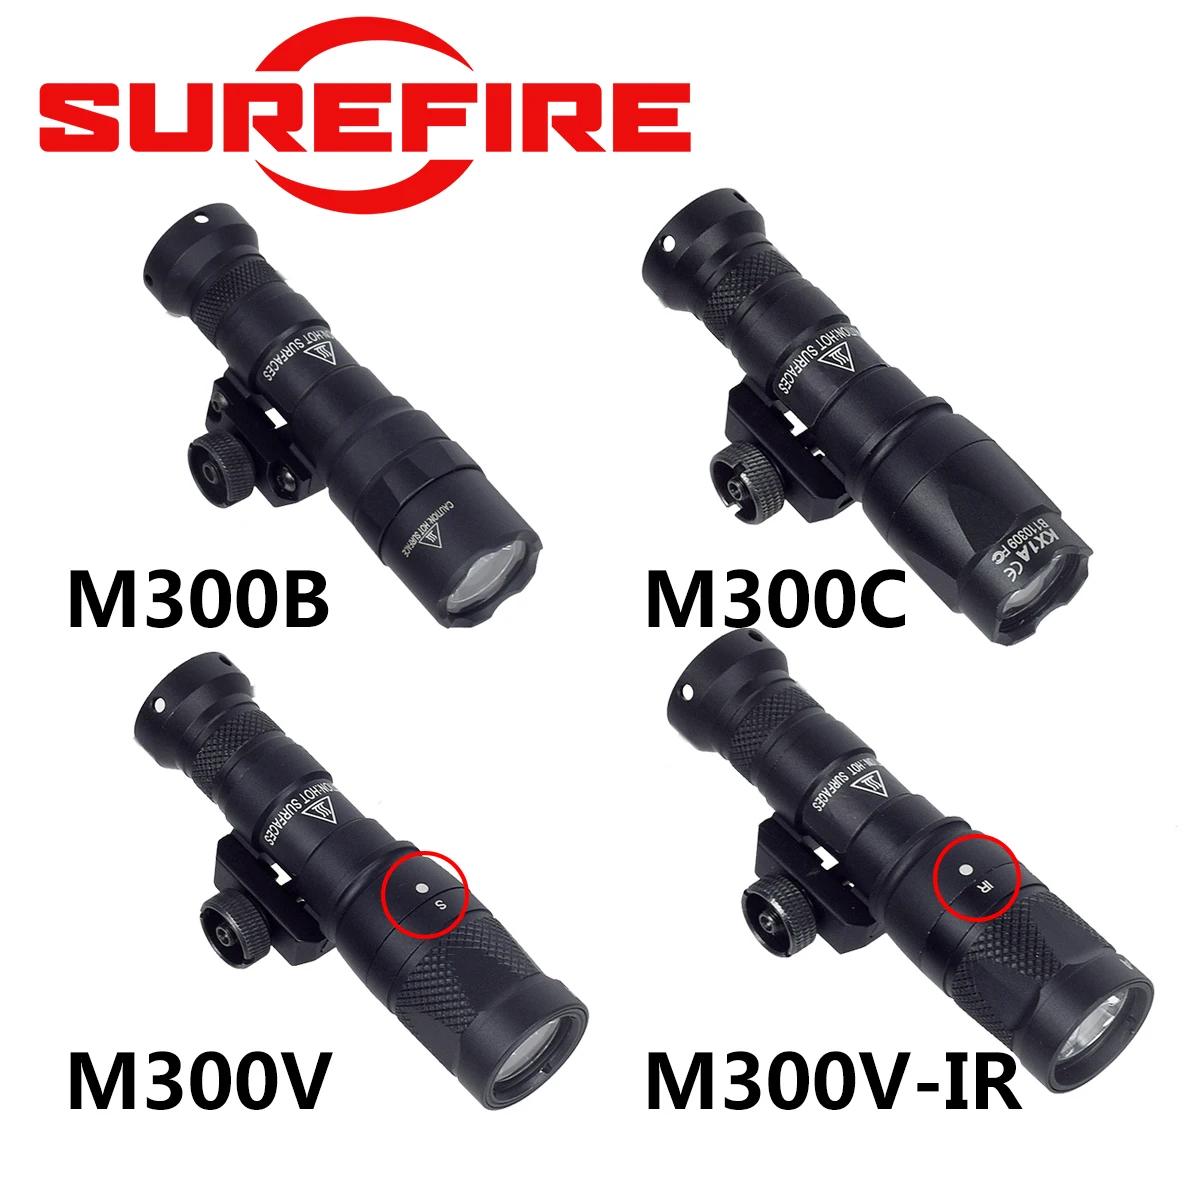 SureFire Airsoft M300 M300B M300C M300V Strobe M300V-IR Infrared Tactical Scout Light AR15 Rifle Weapon Flashlight L